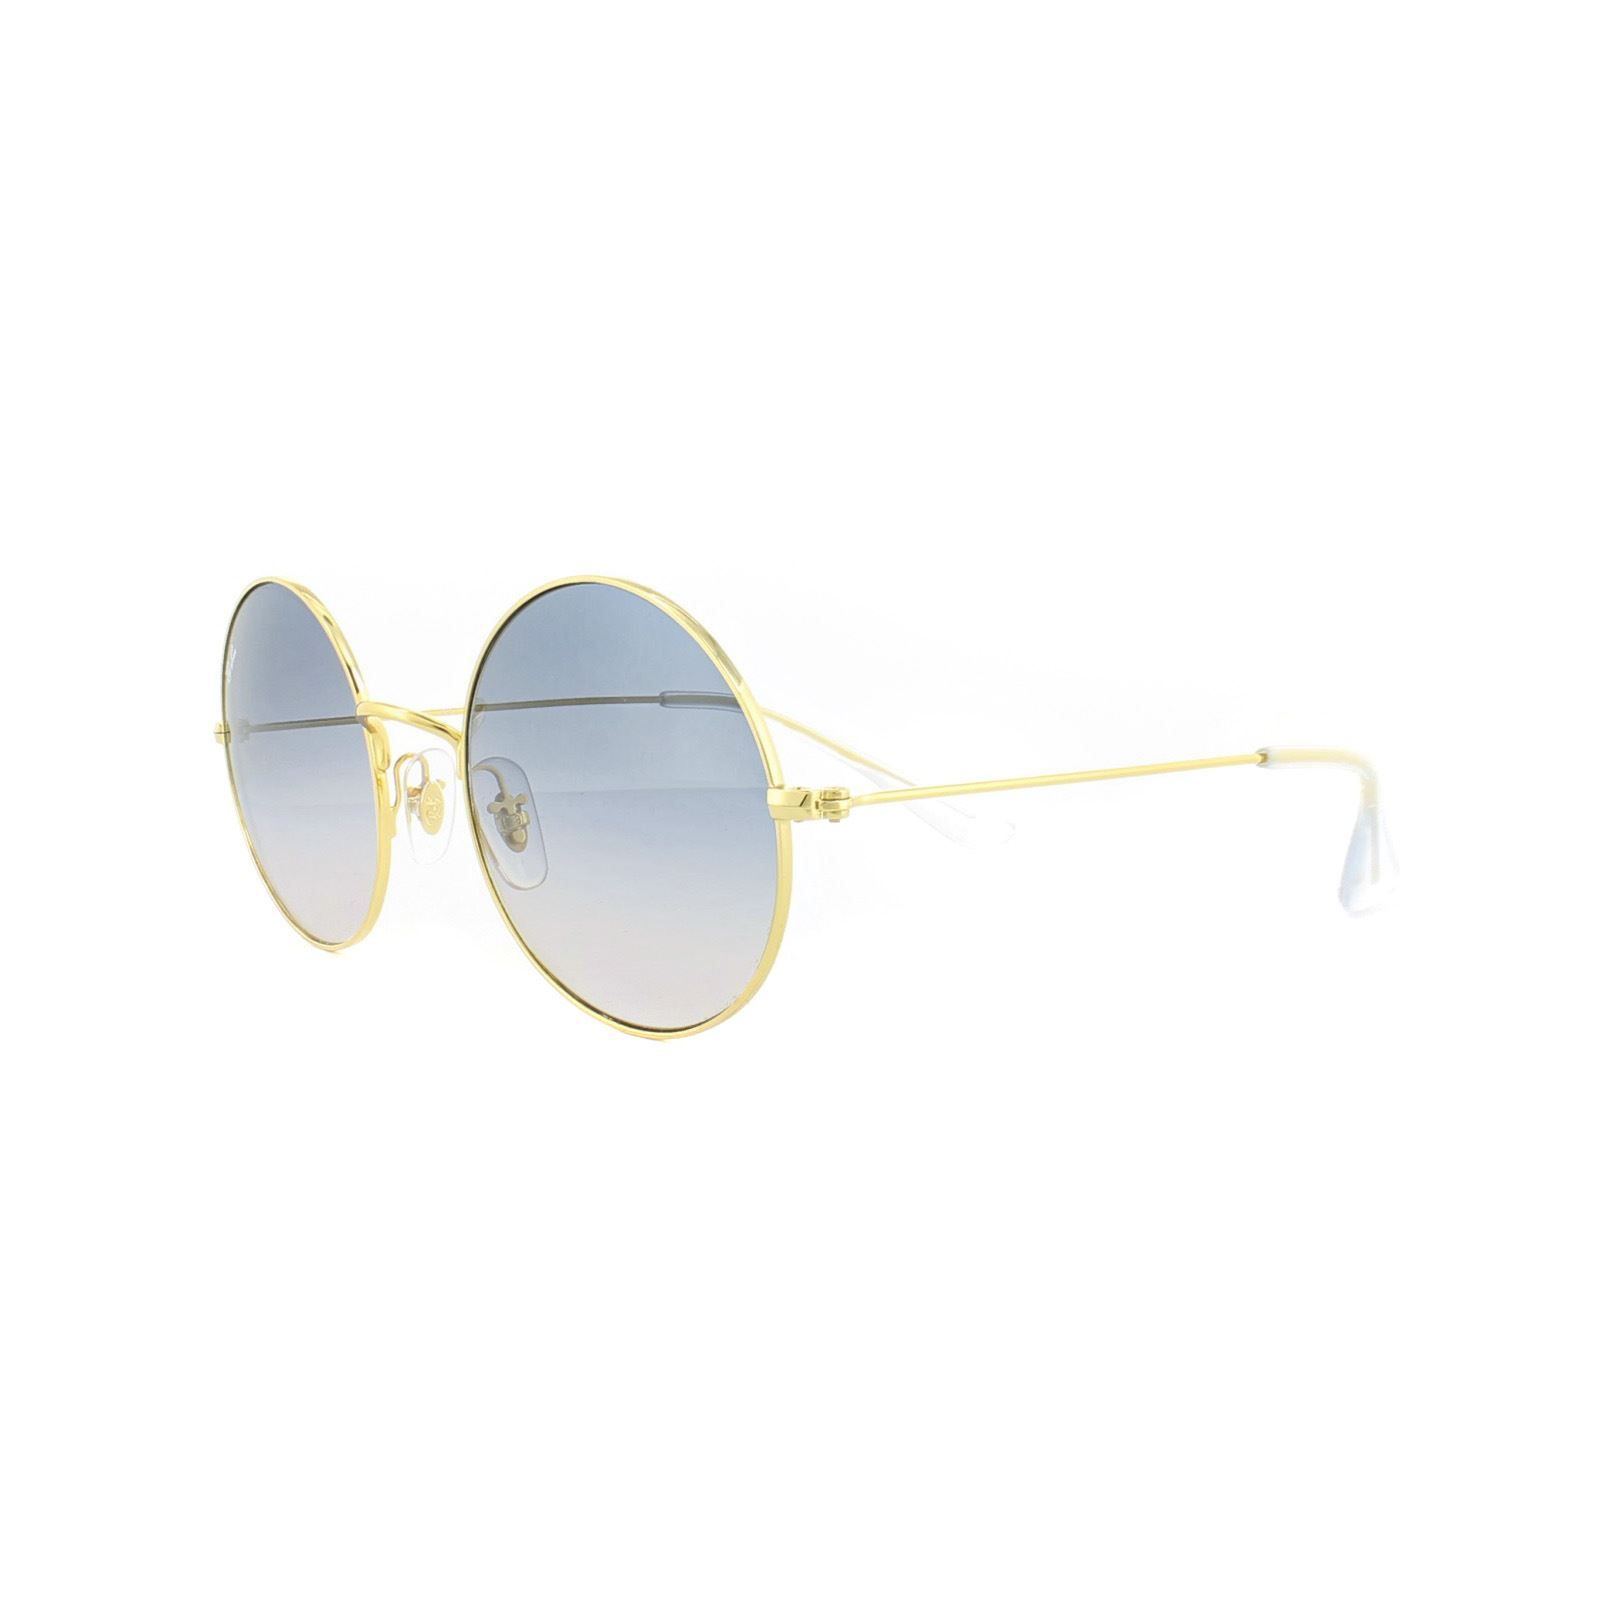 Ray-Ban Sunglasses Ja-Jo 3592 001/I9 Gold Blue Gradient take their inspiration from the festival scene with a large lenses version of the full metal round shape and given fun bright colours in the lenses and matched with colourful metal rims.